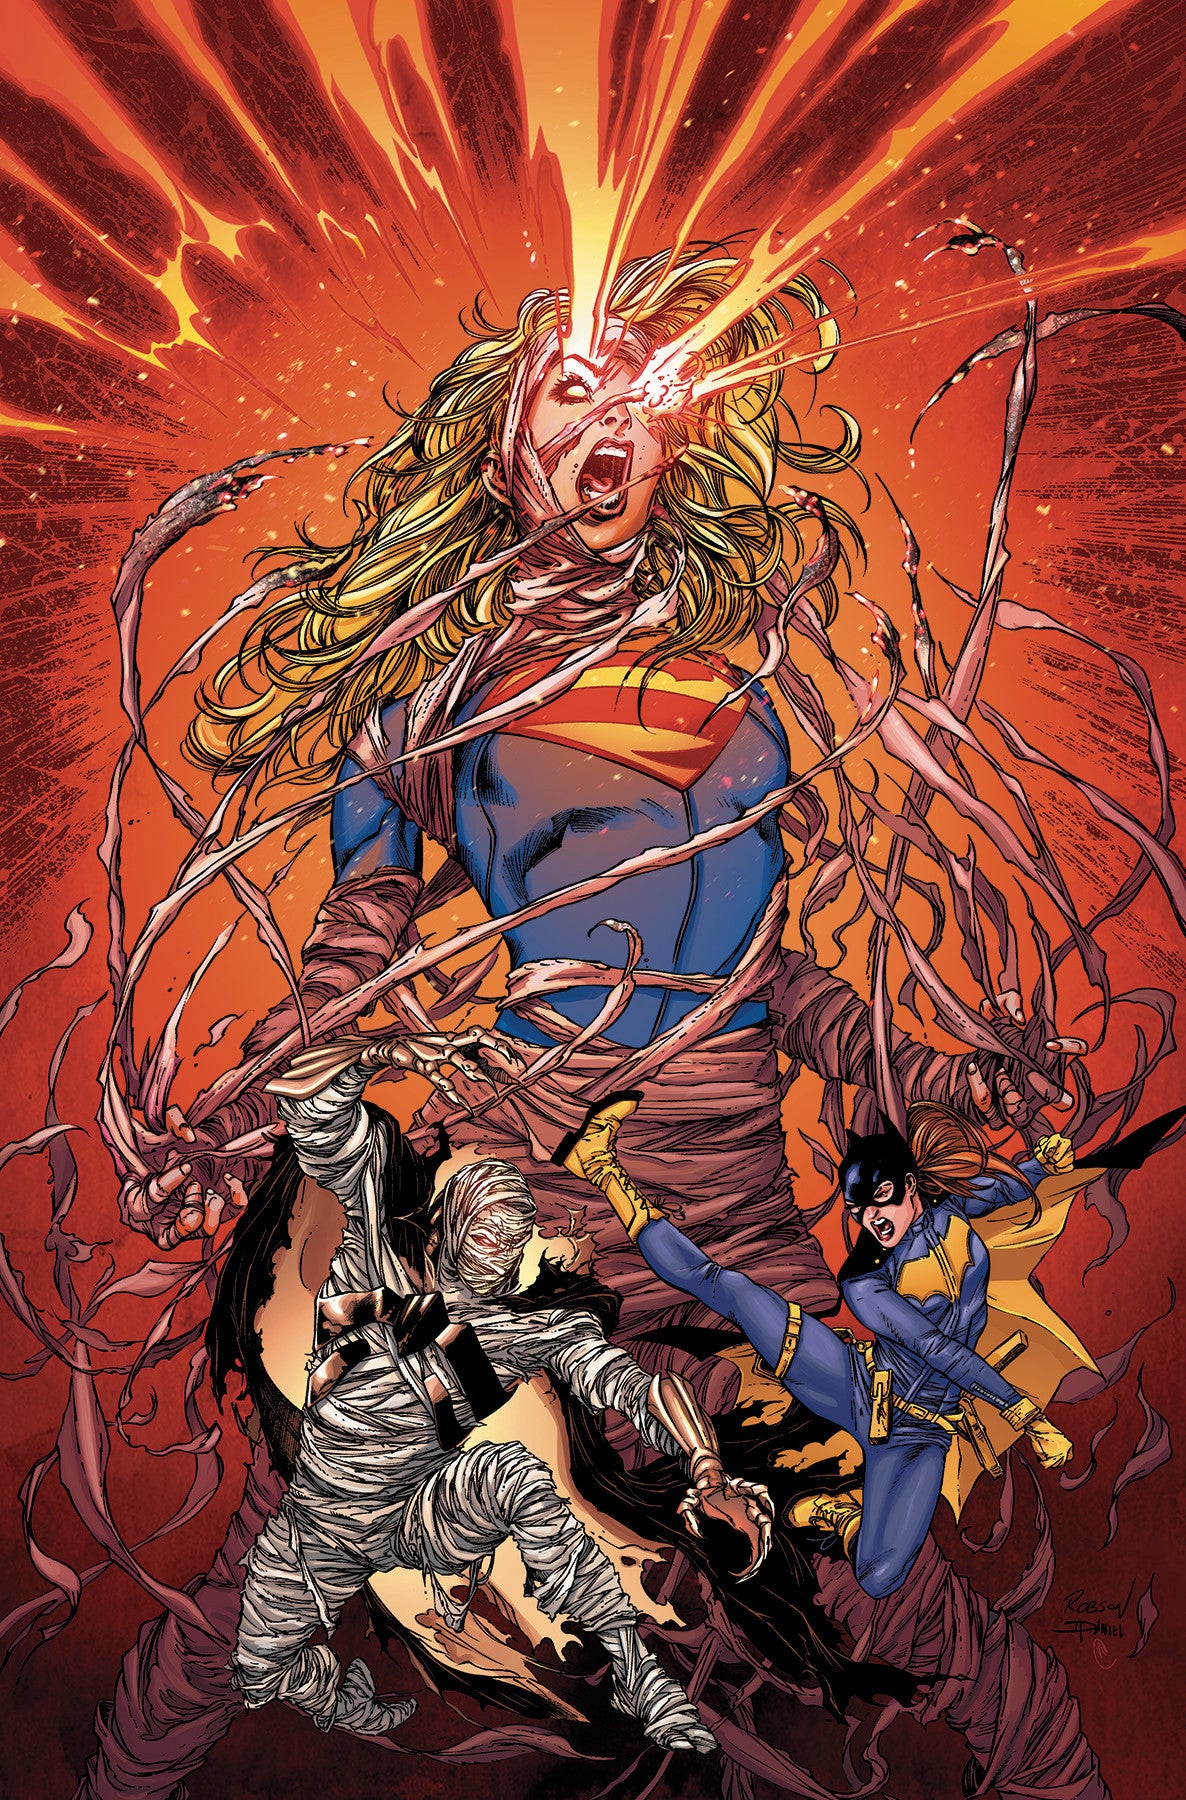 SUPERGIRL #11 COVER